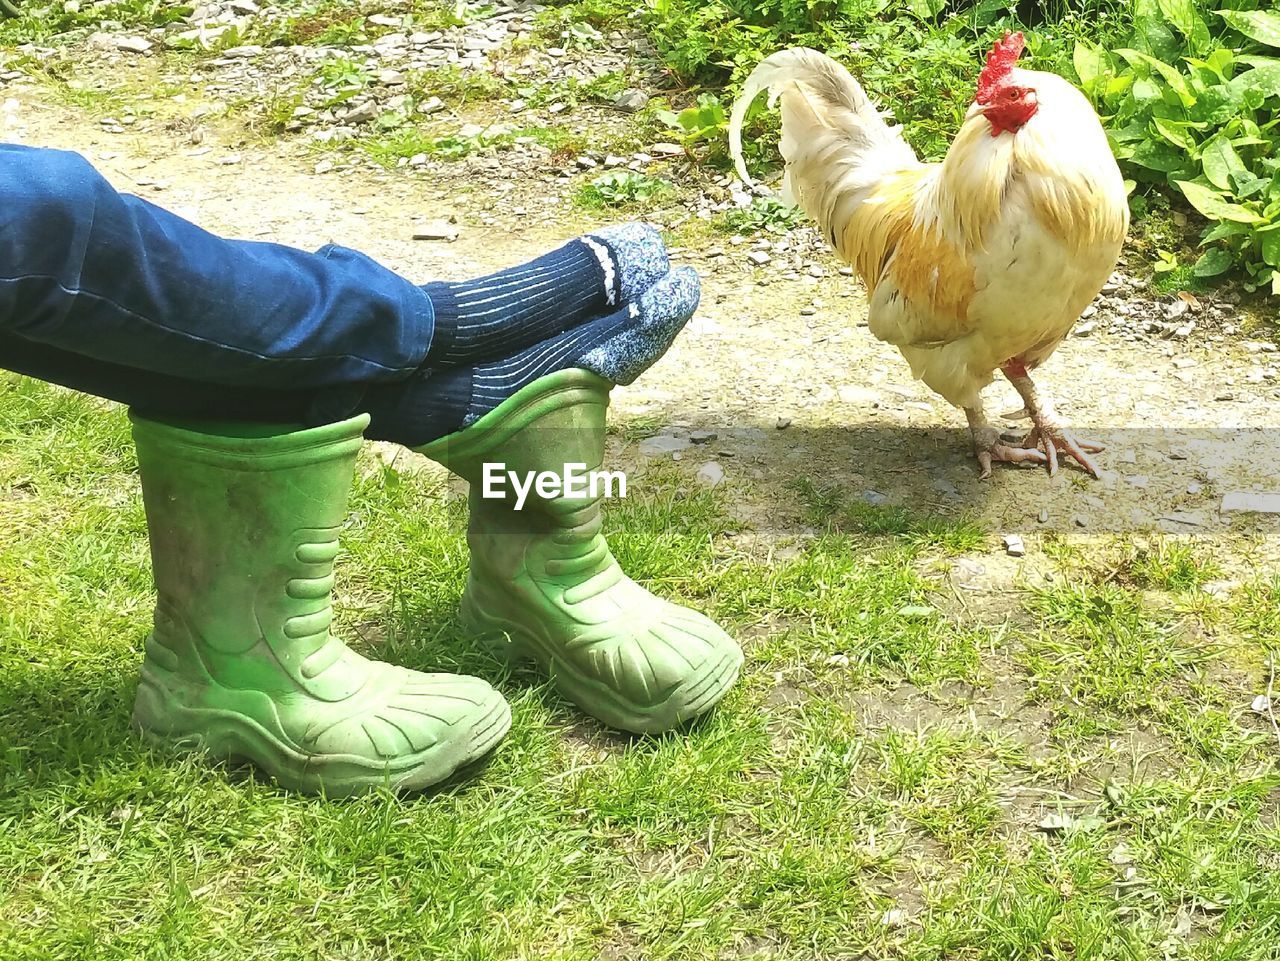 Low section of man lying on rubber boot by cockerel